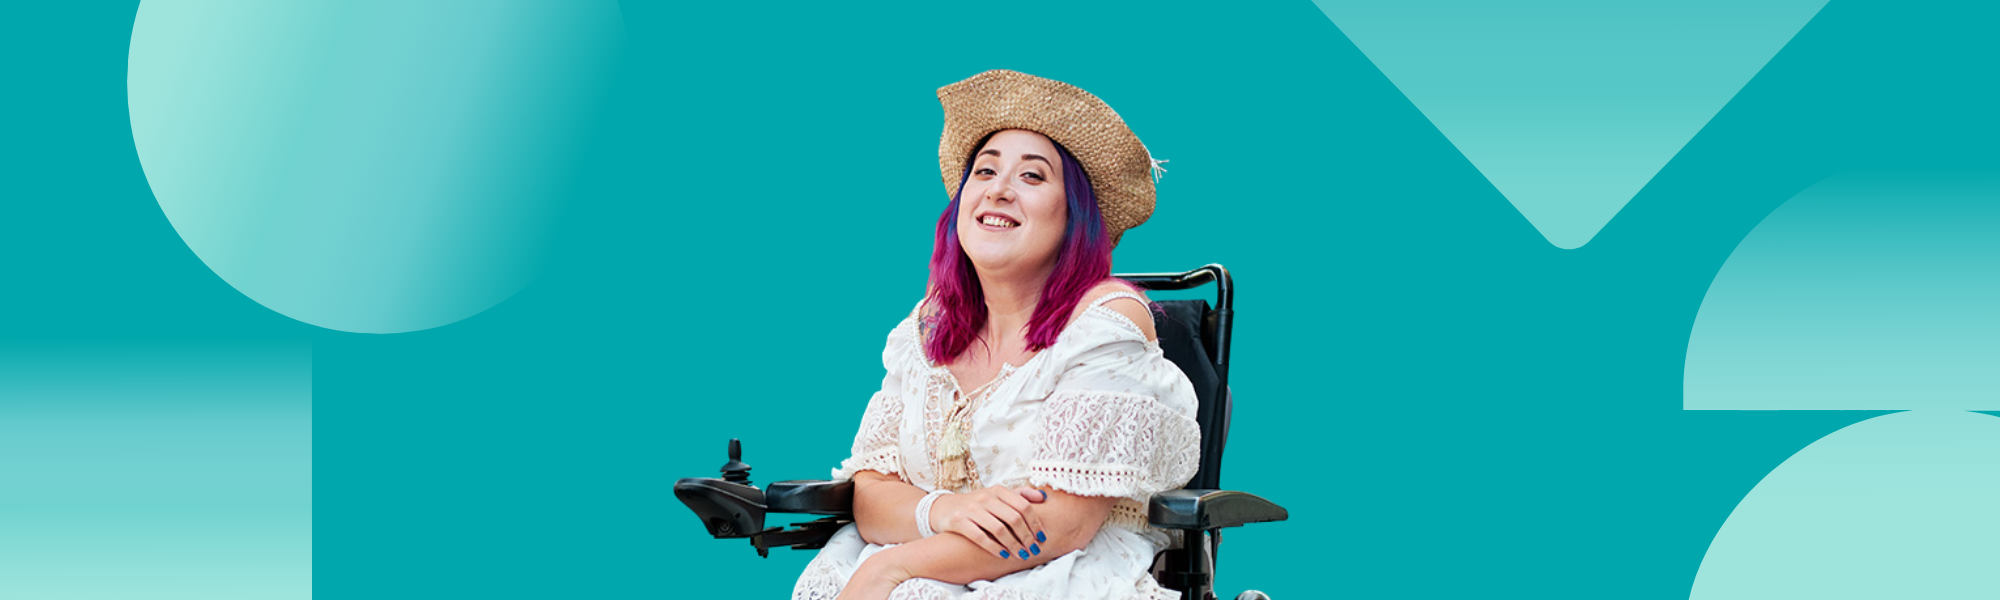 IMAGE: A young woman who uses a wheelchair, smiling